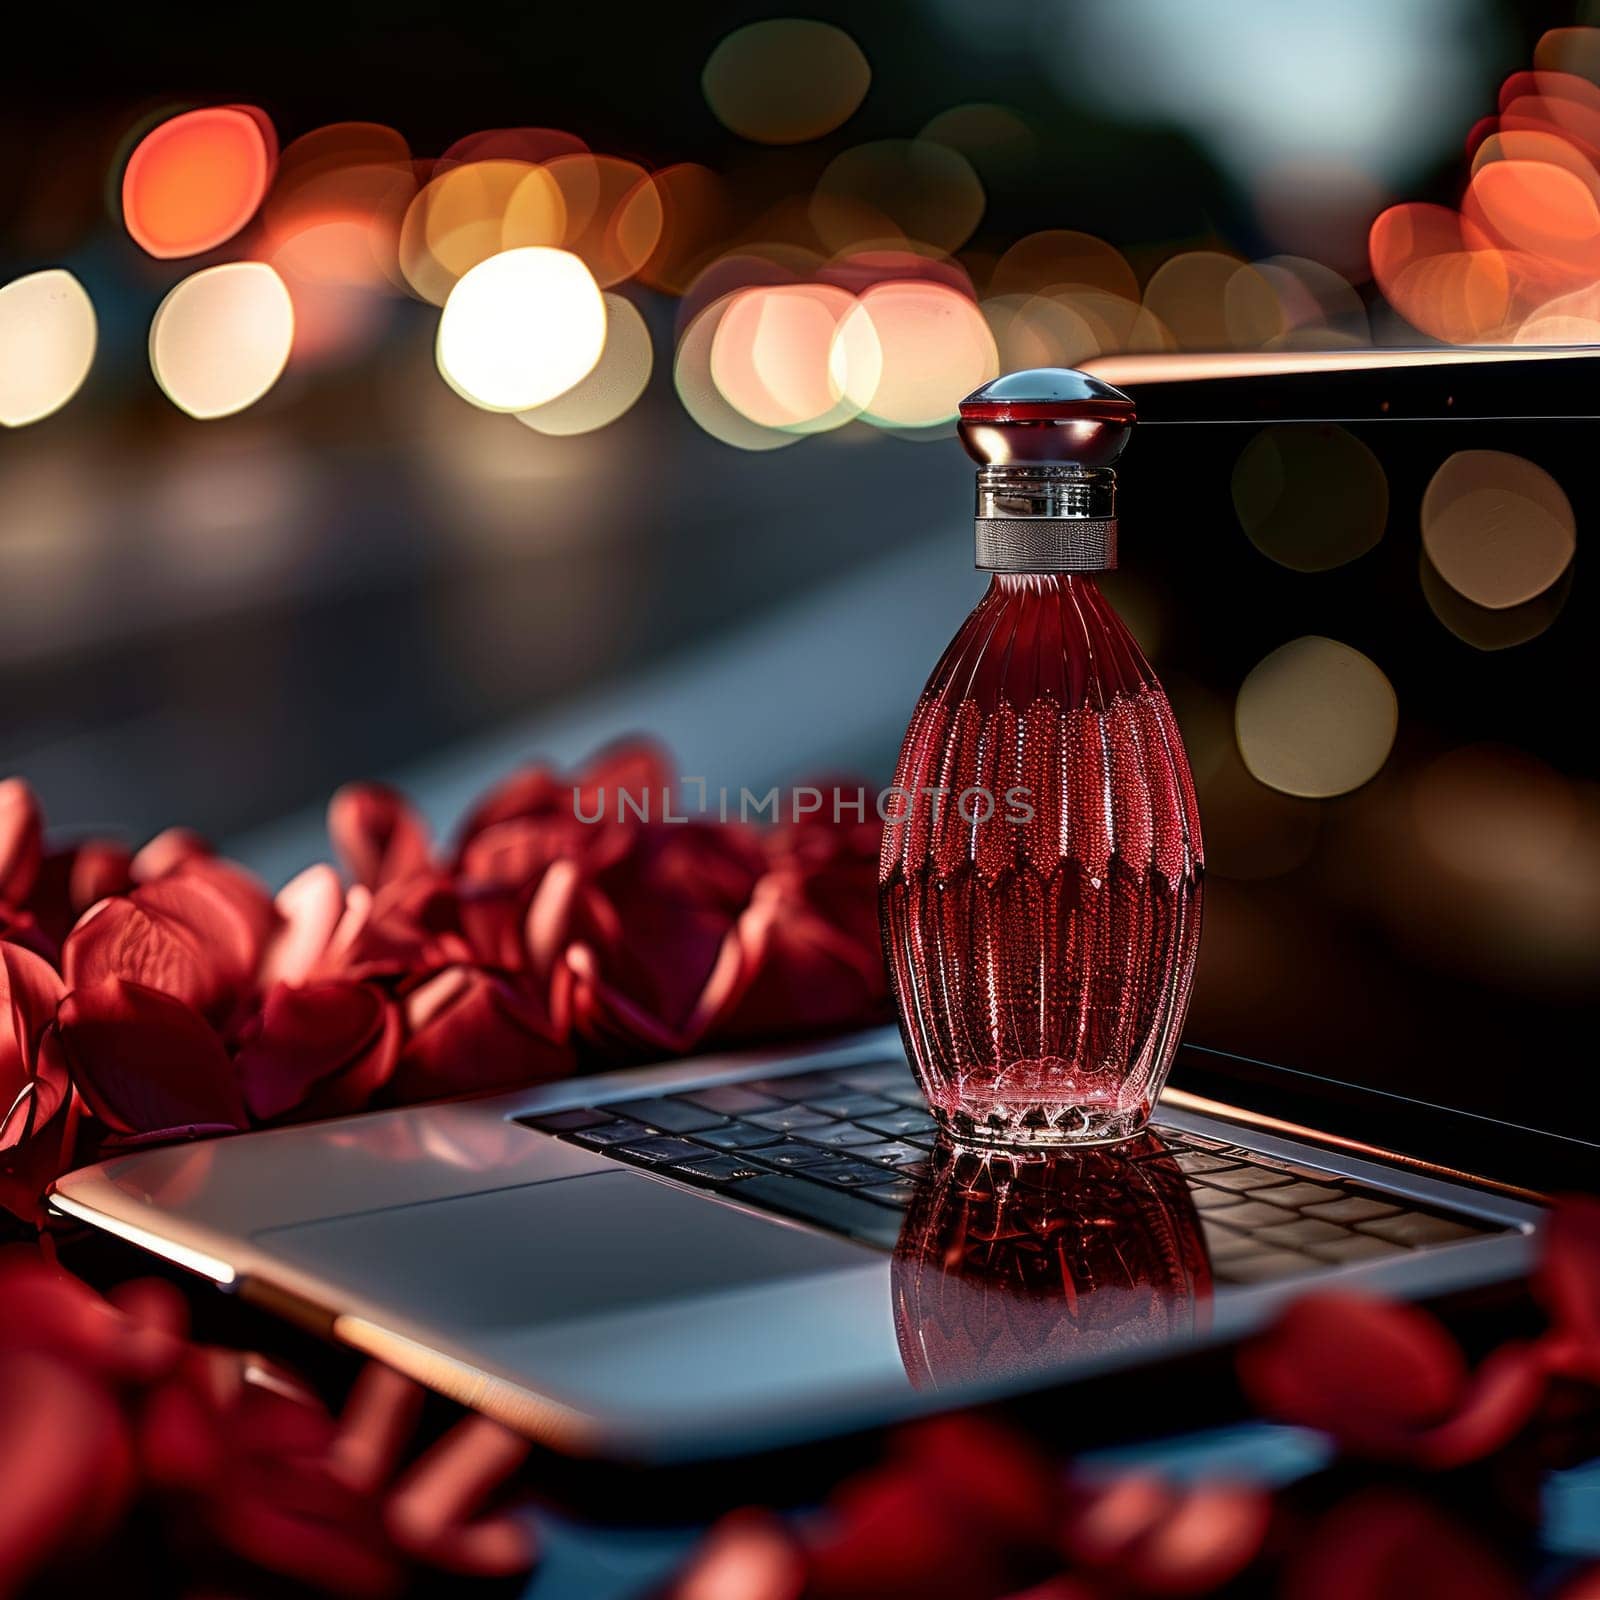 A vibrant red bottle rests on top of an open laptop computer, creating a striking contrast of colors by but_photo